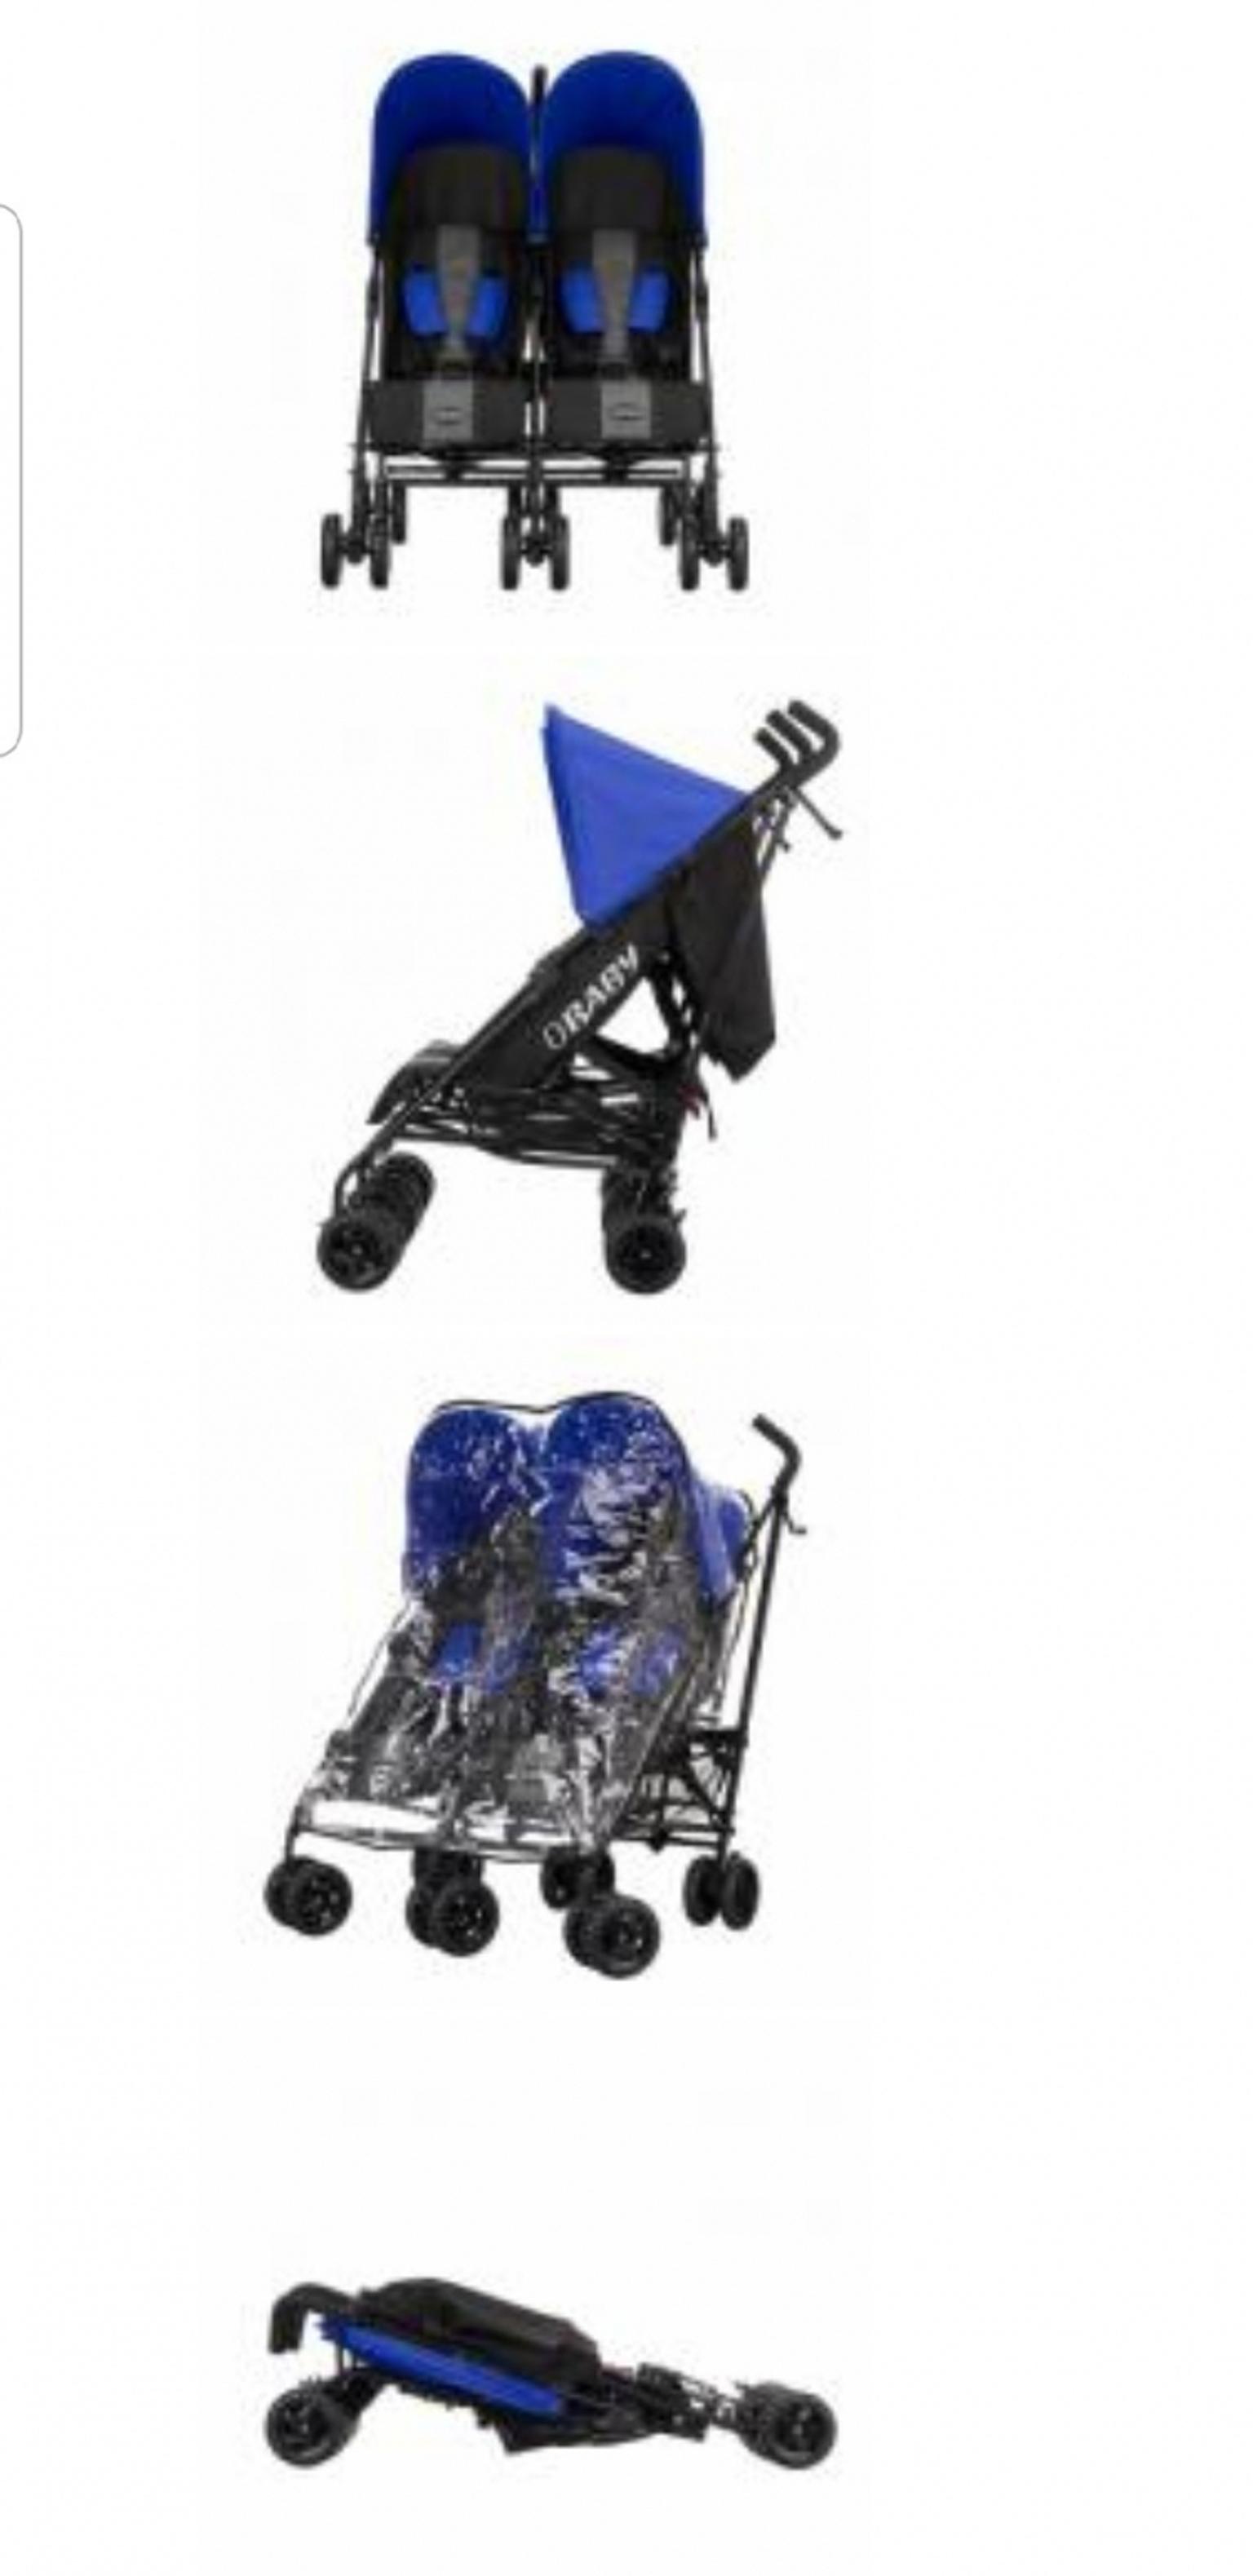 obaby double buggy